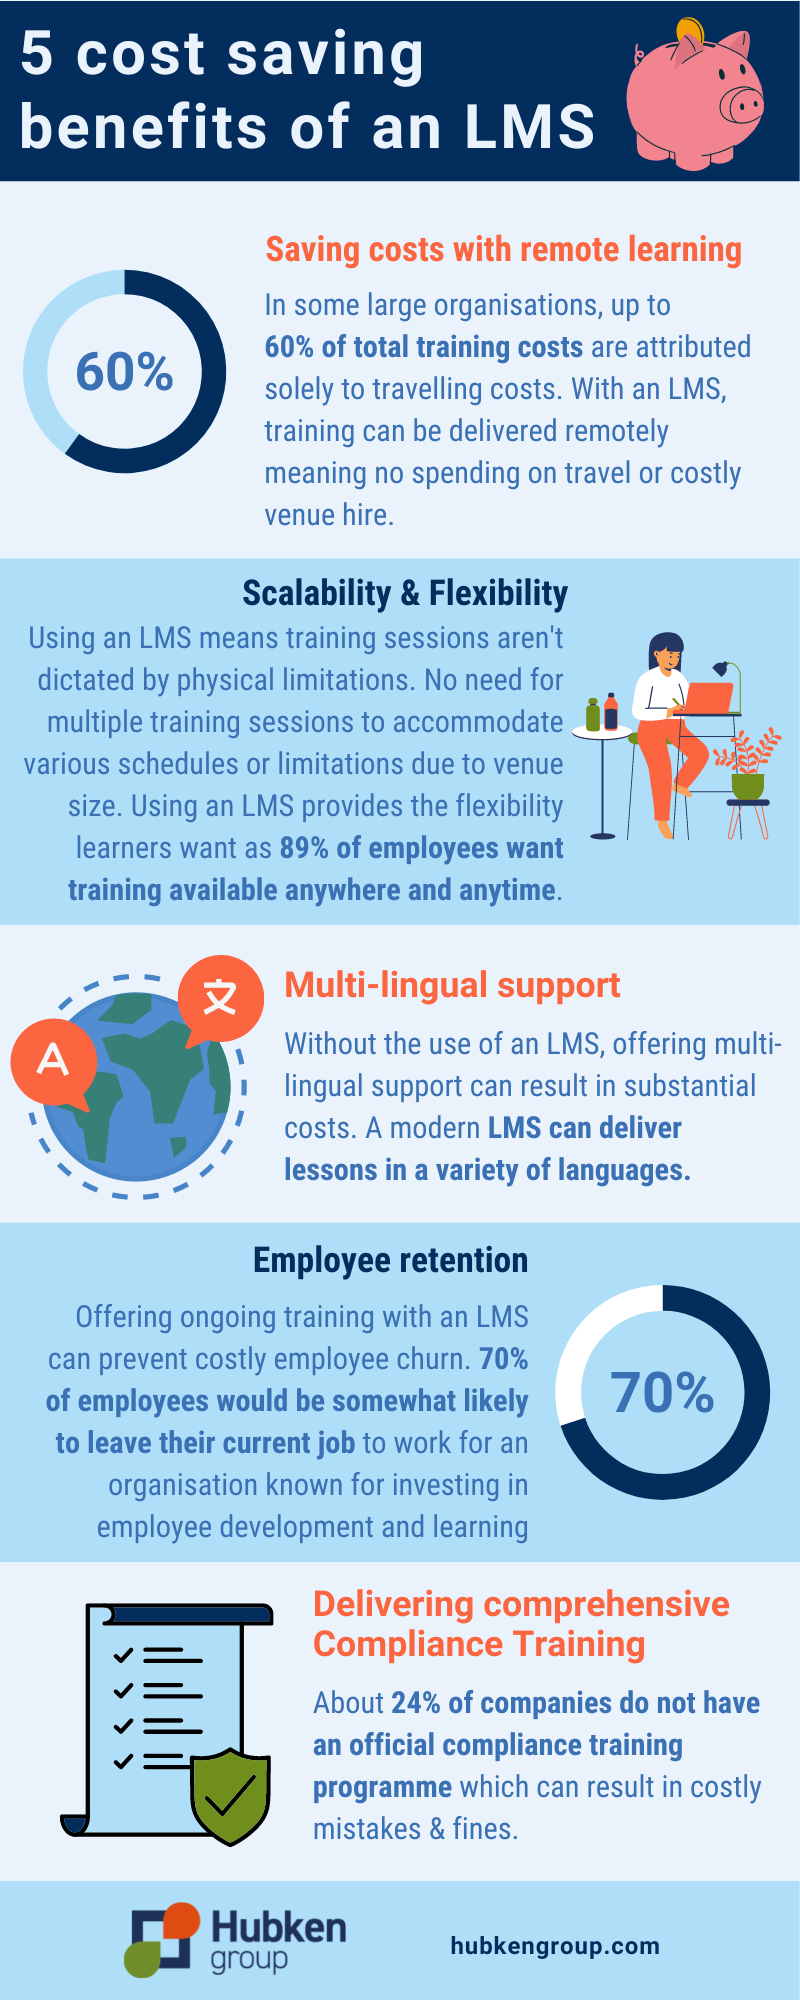 5 cost saving benefits of an LMS